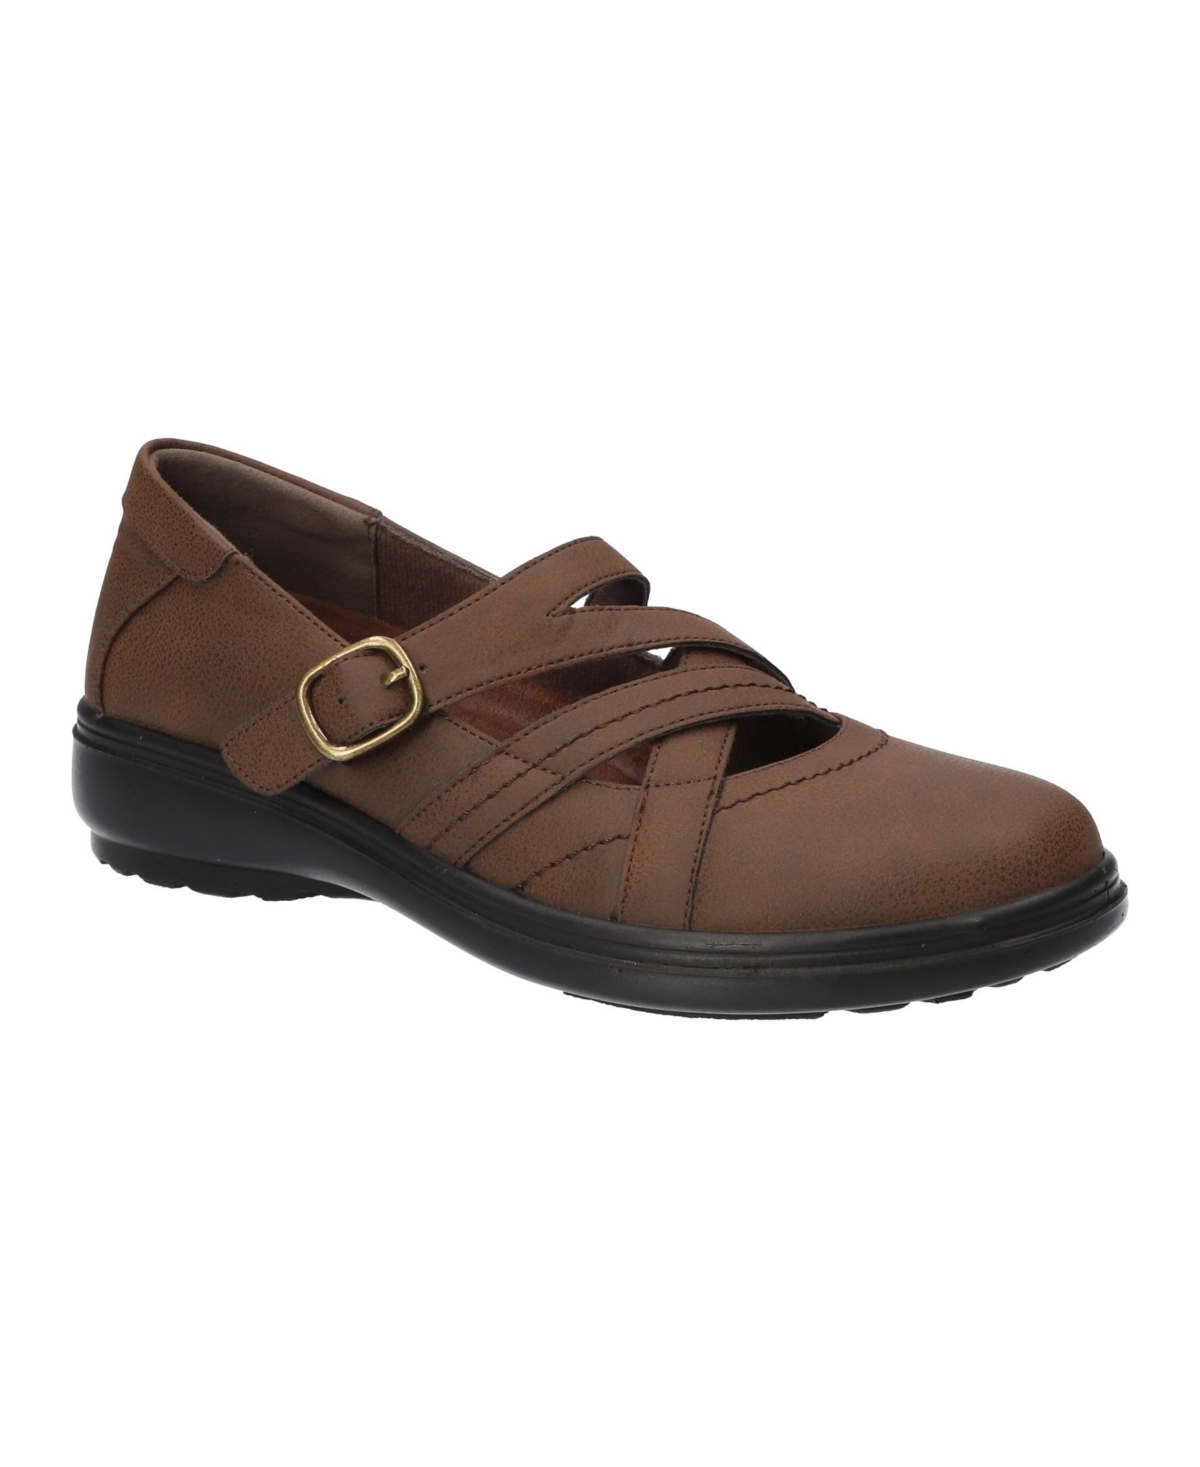 Women's Wise Comfort Mary Janes - Tan